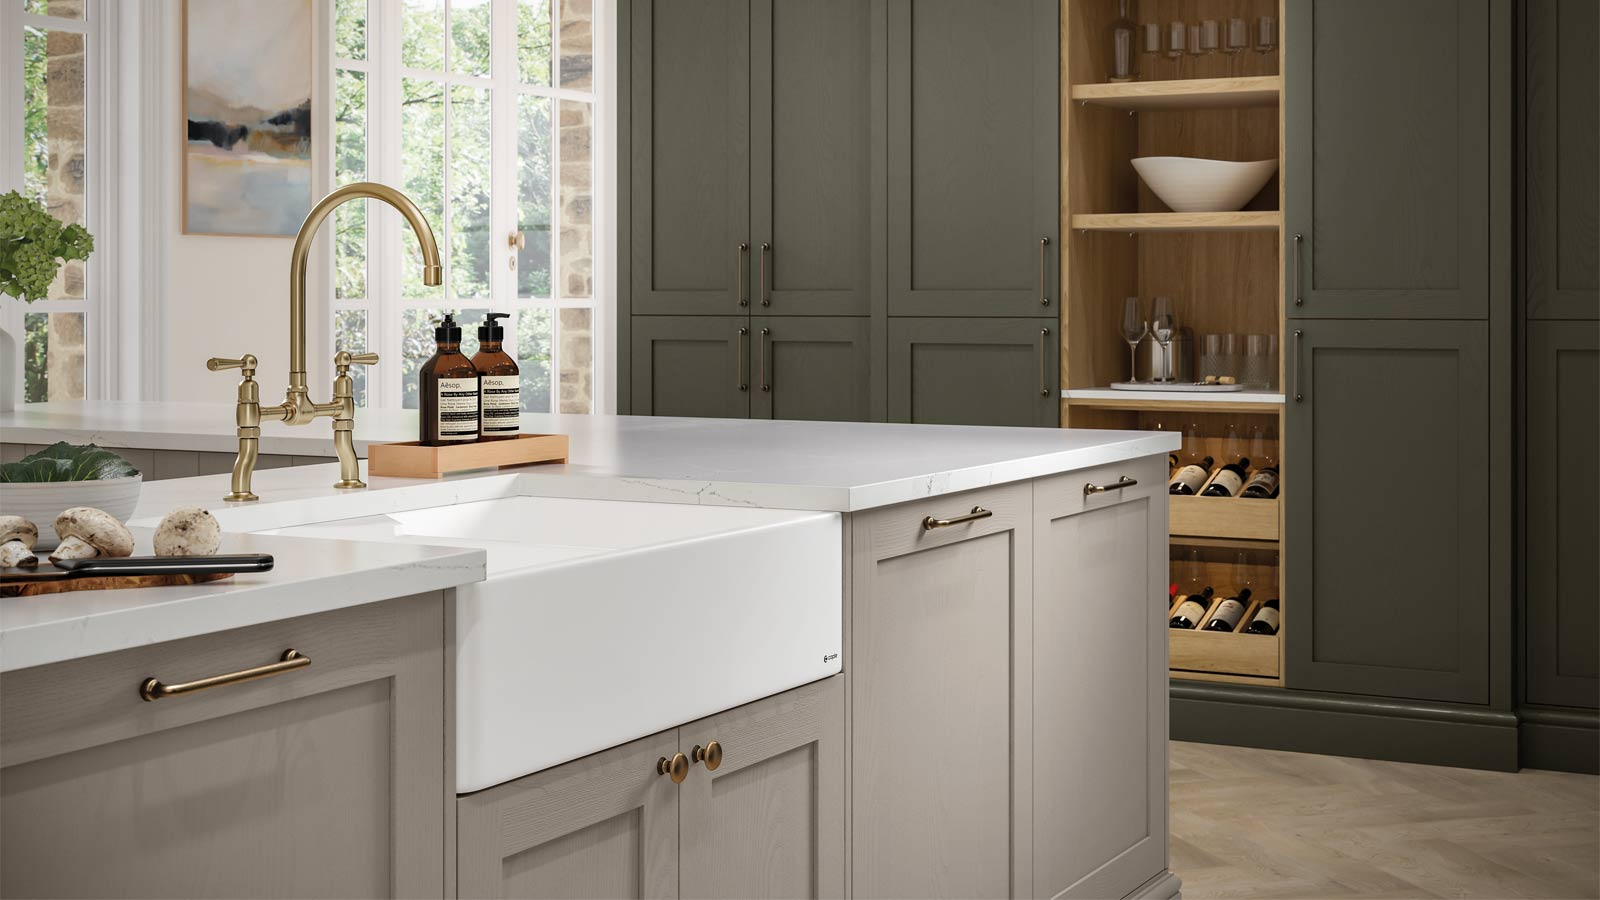 A Shaker-style kitchen with modern sage green kitchen cabinets and cream Shaker kitchen elements